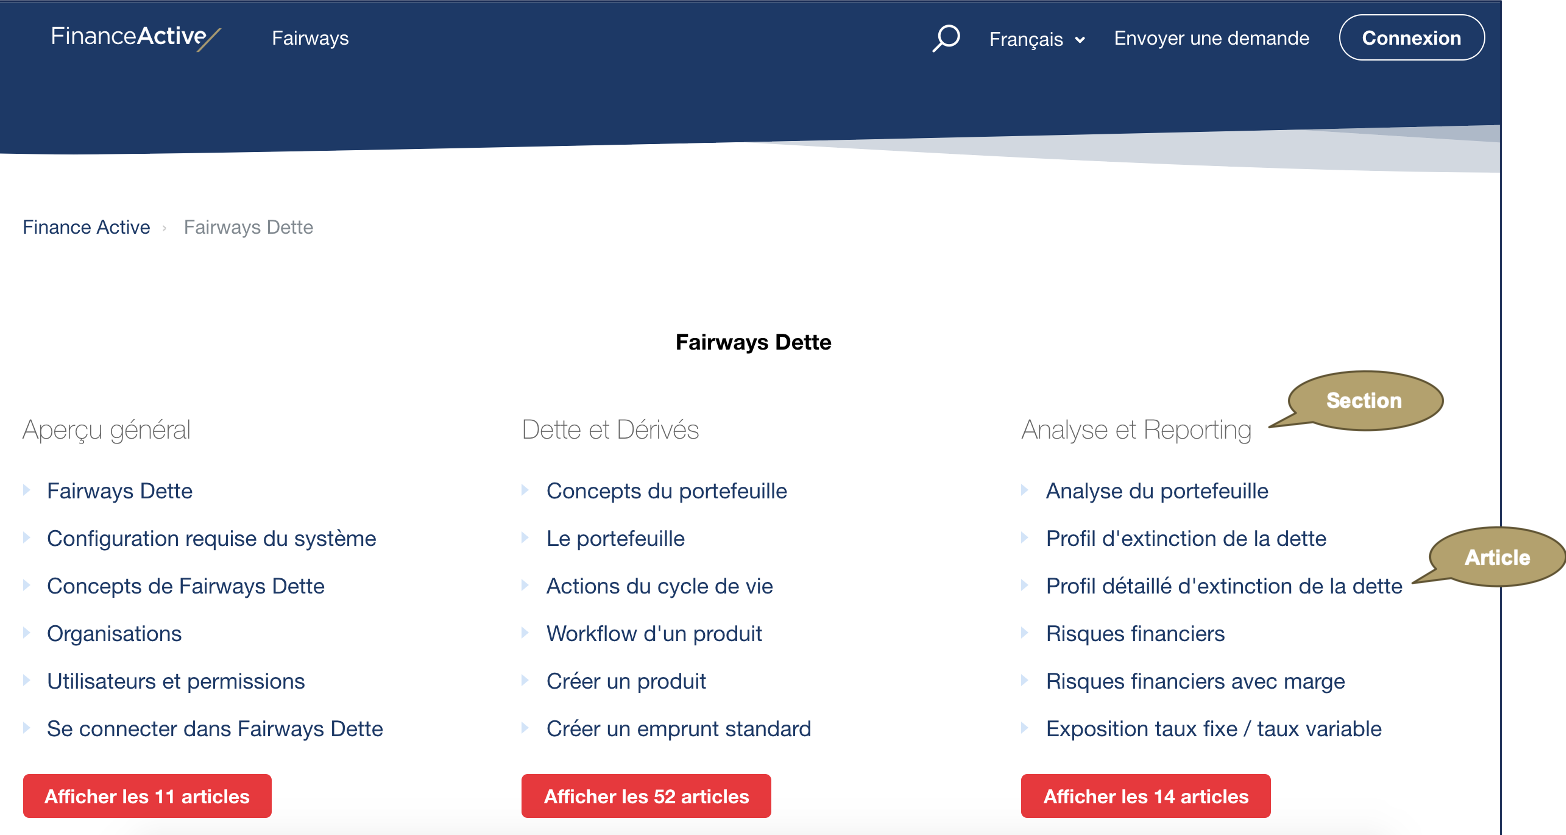 HelpCenter_Category_FR.png